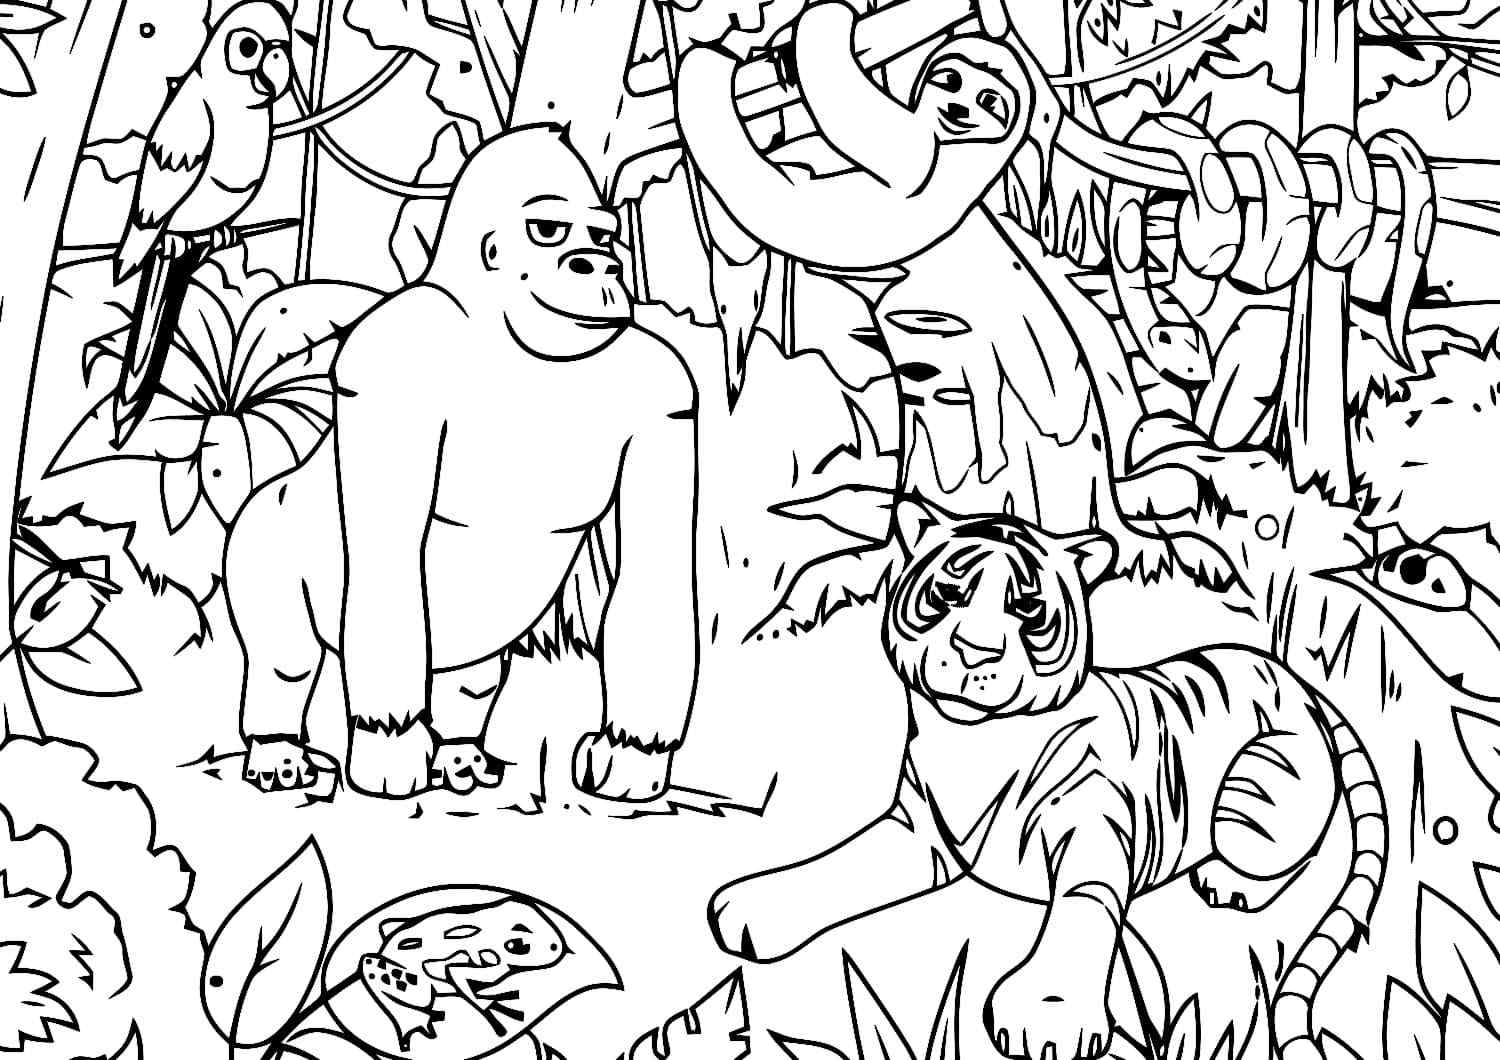 Sloth Can Be Found In The Wild Coloring Page